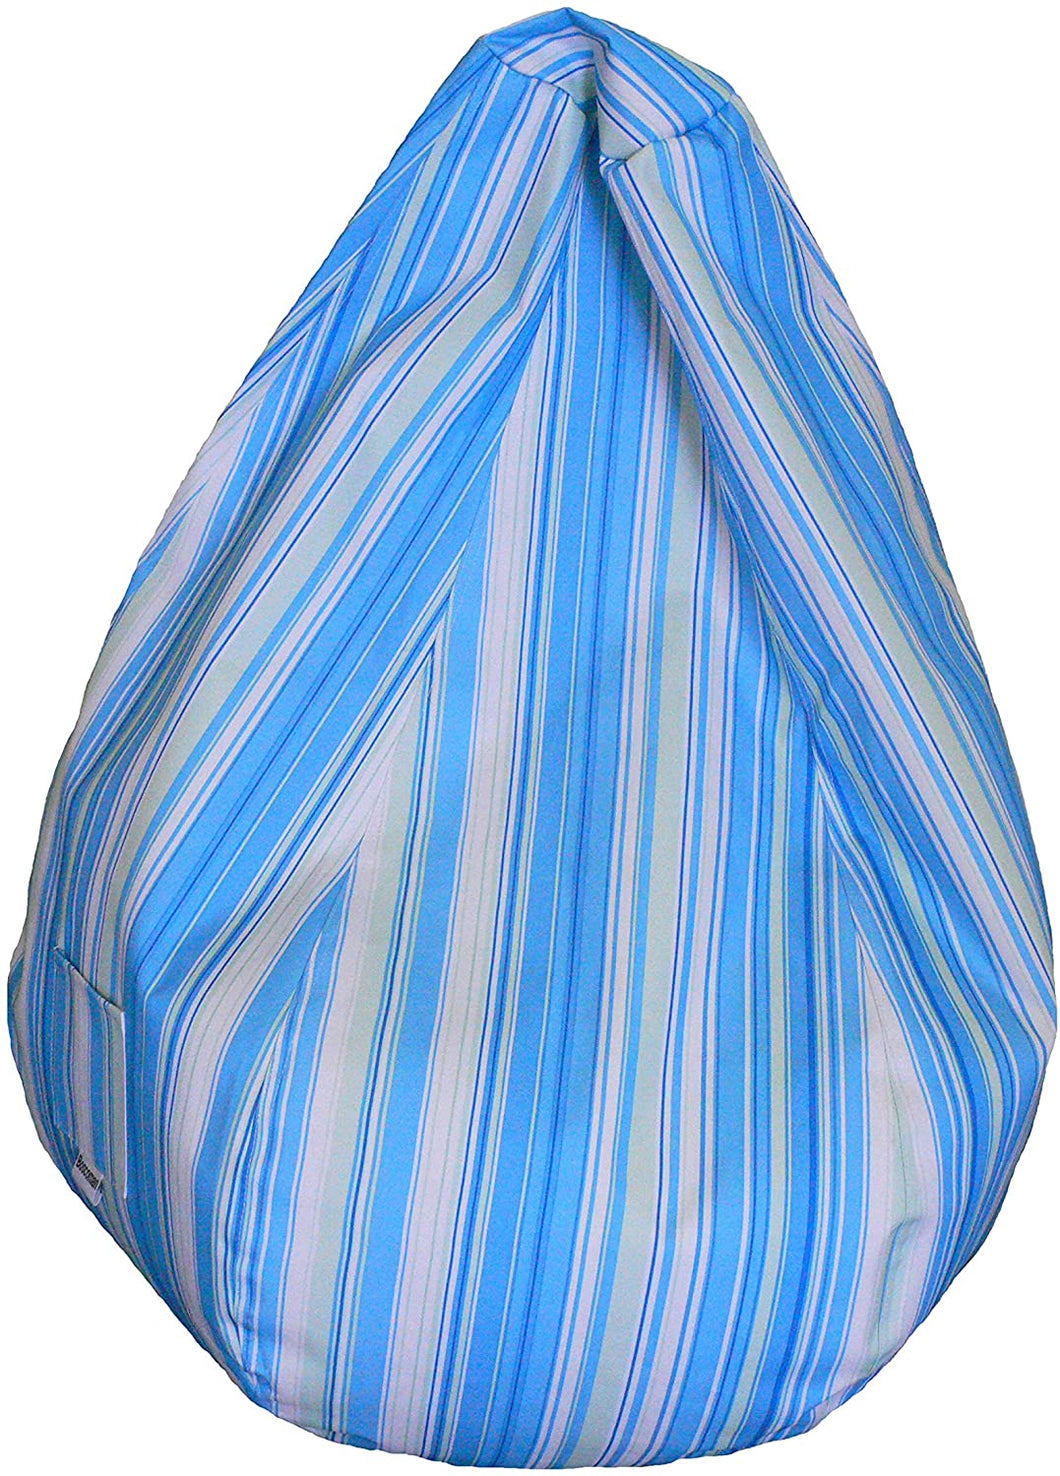 Boscoman - Adult Pear-shape Striped Beanbag Chair - Blue/Green - COVER ONLY